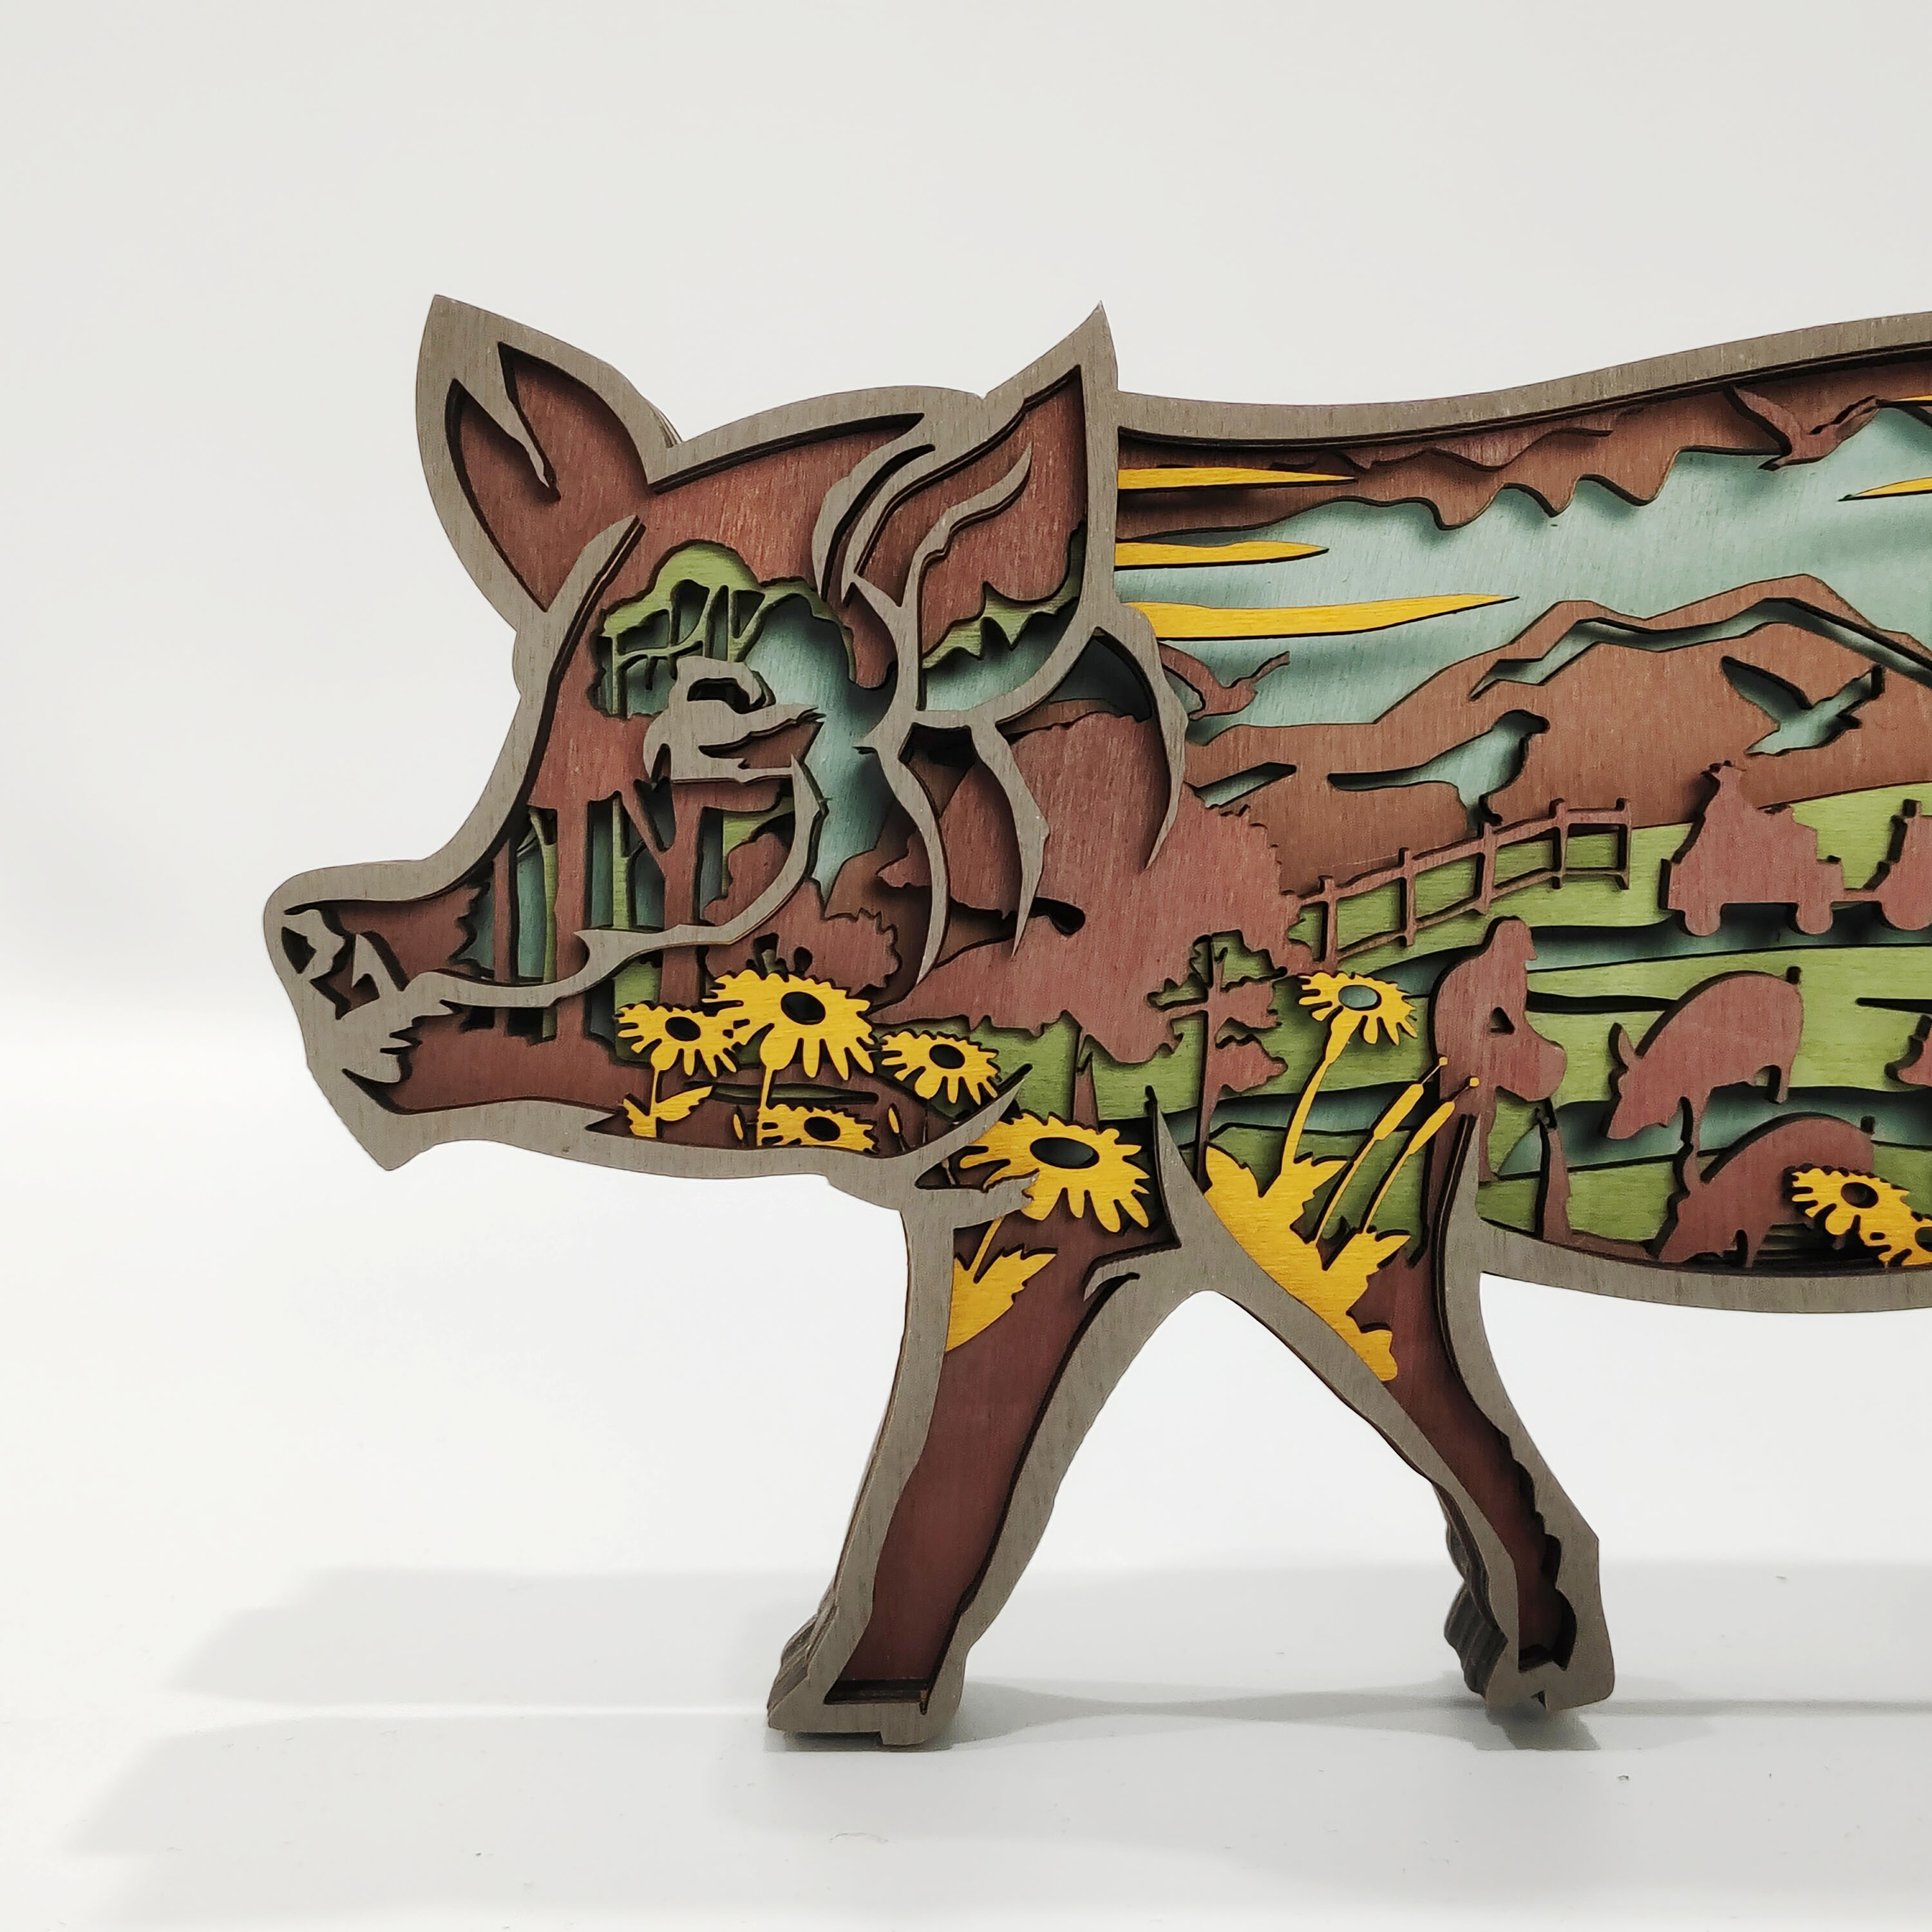 New Arrivals✨-Pig Wooden Carving Gift